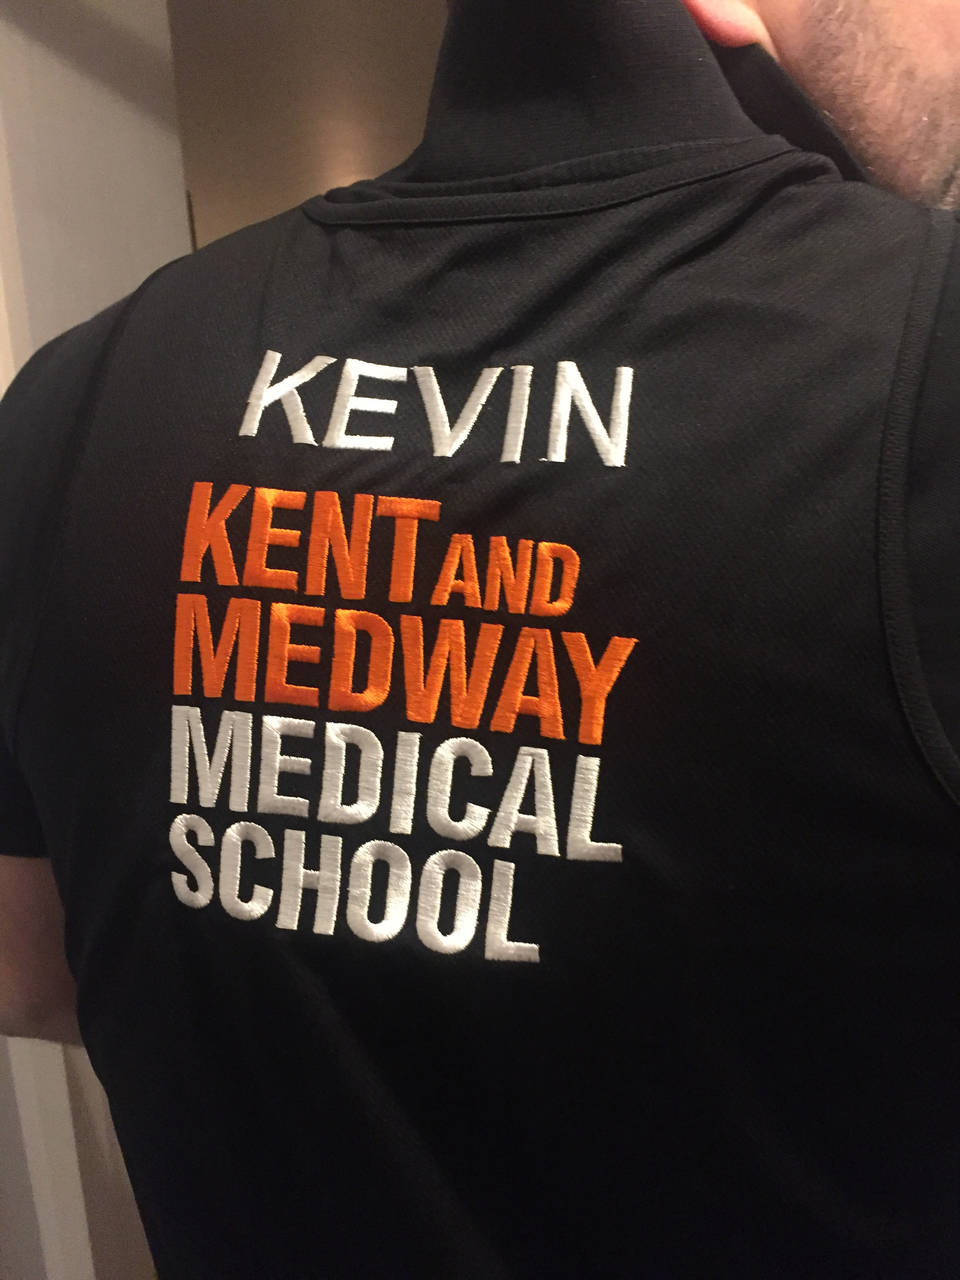 Kevin's jacket for the Kent and Medical Medical School charity run